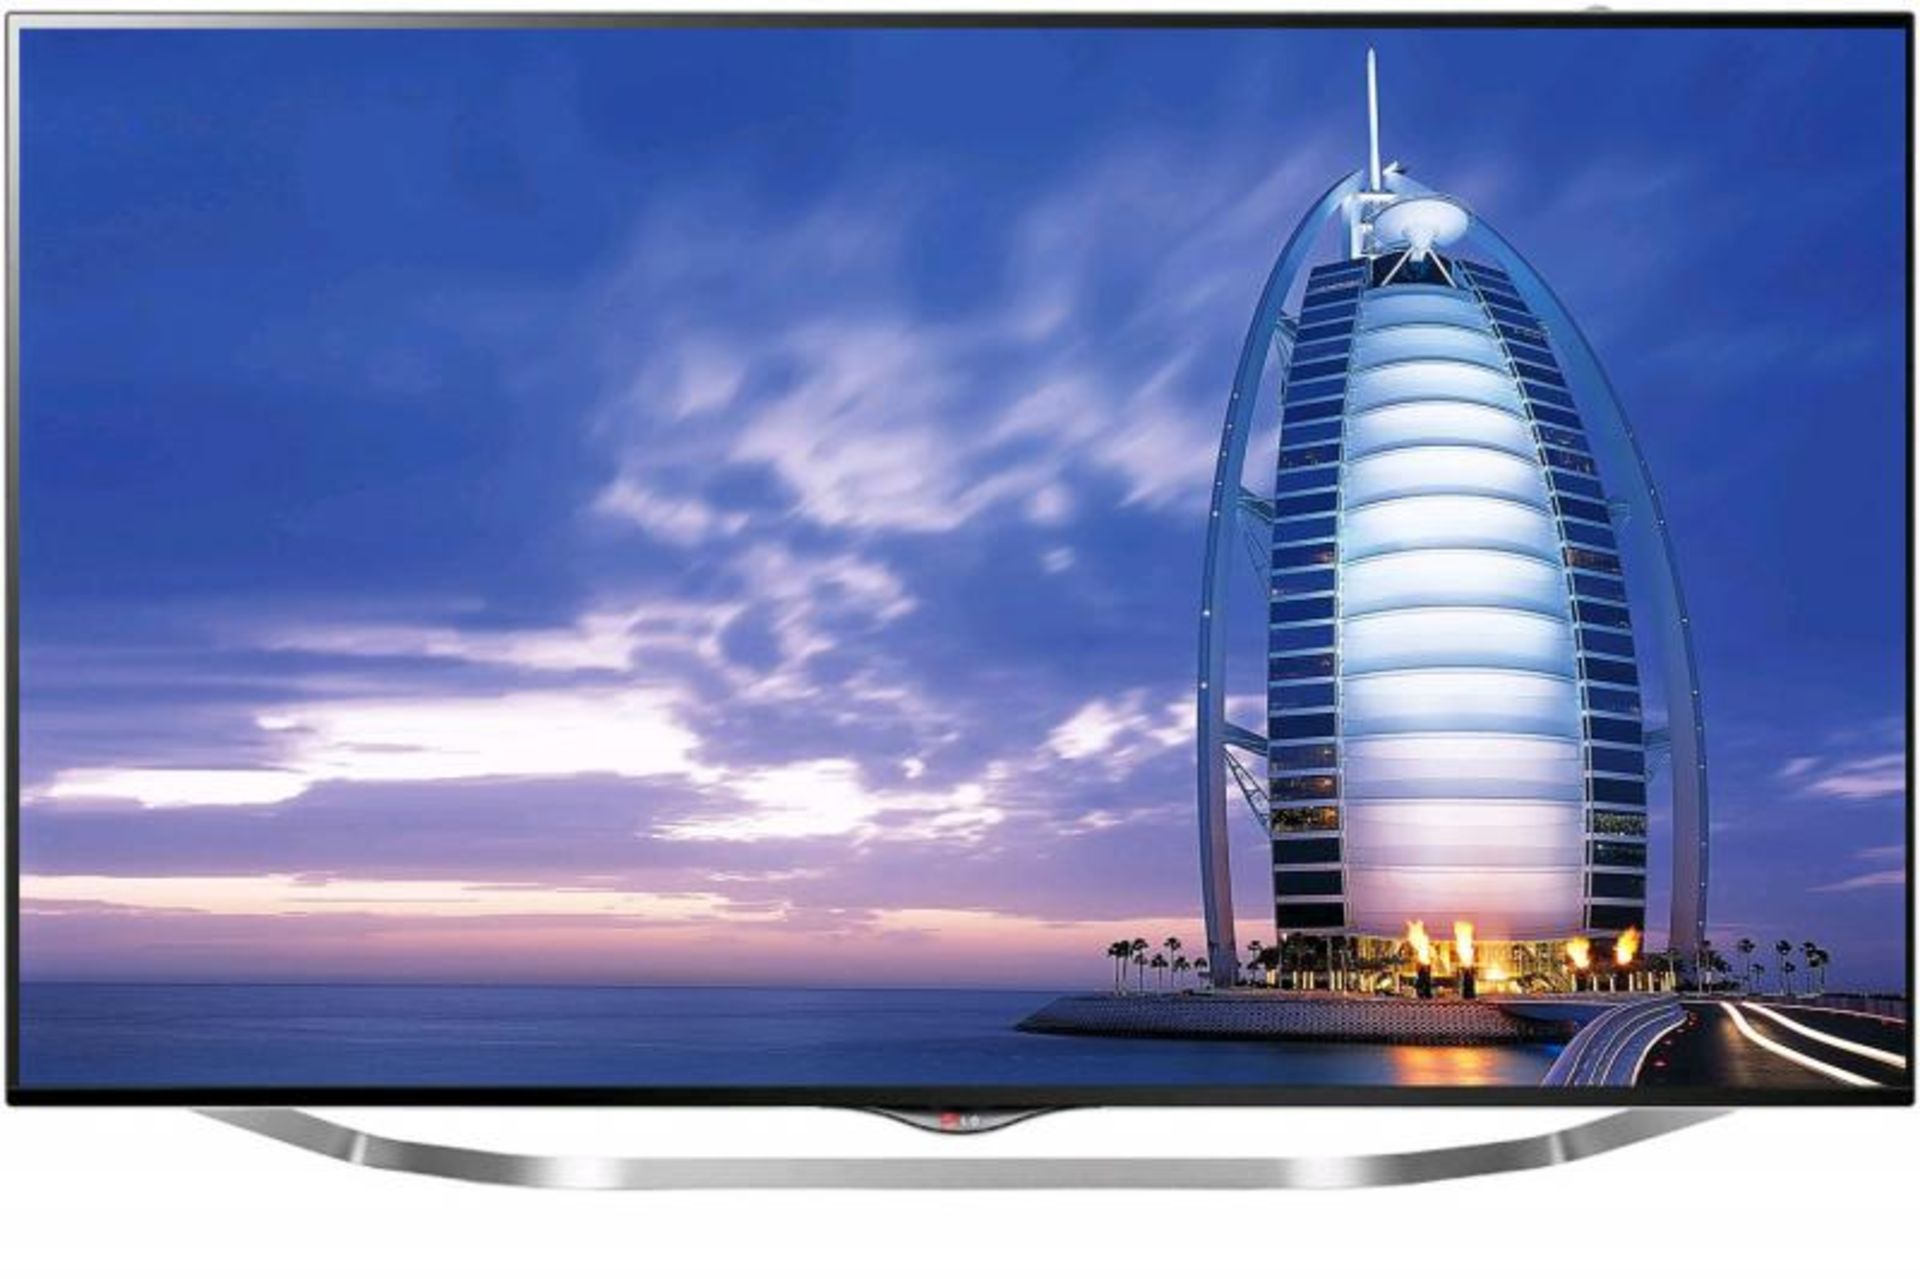 V Grade A LG 55 Inch 4K ULTRA HD LED 3D SMART TV WITH FREEVIEW HD & WEBOS & WIFI 55UB850V